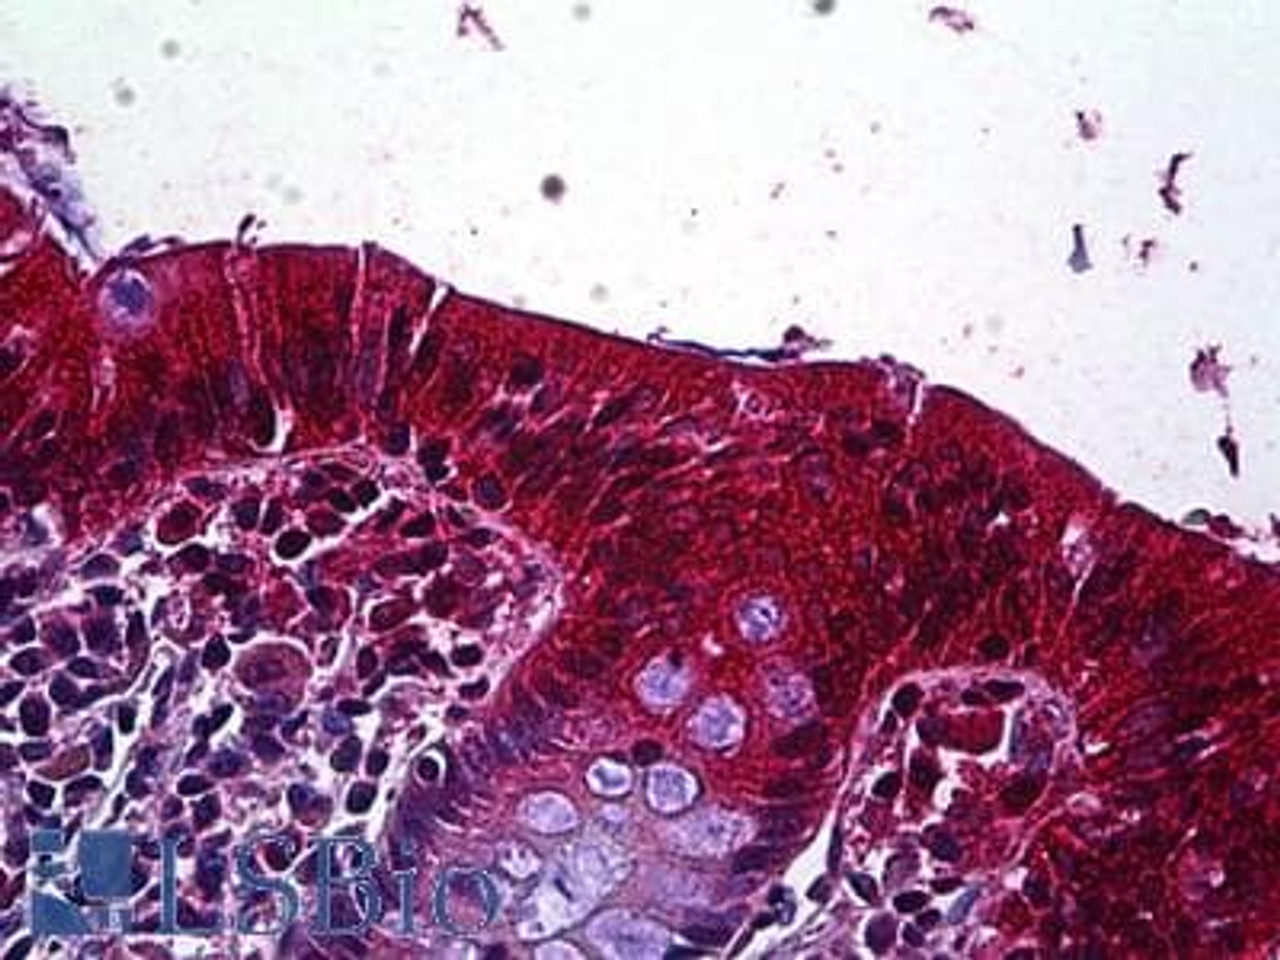 46-950 Negative Control showing staining of paraffin embedded Human Colon, with no primary antibody.